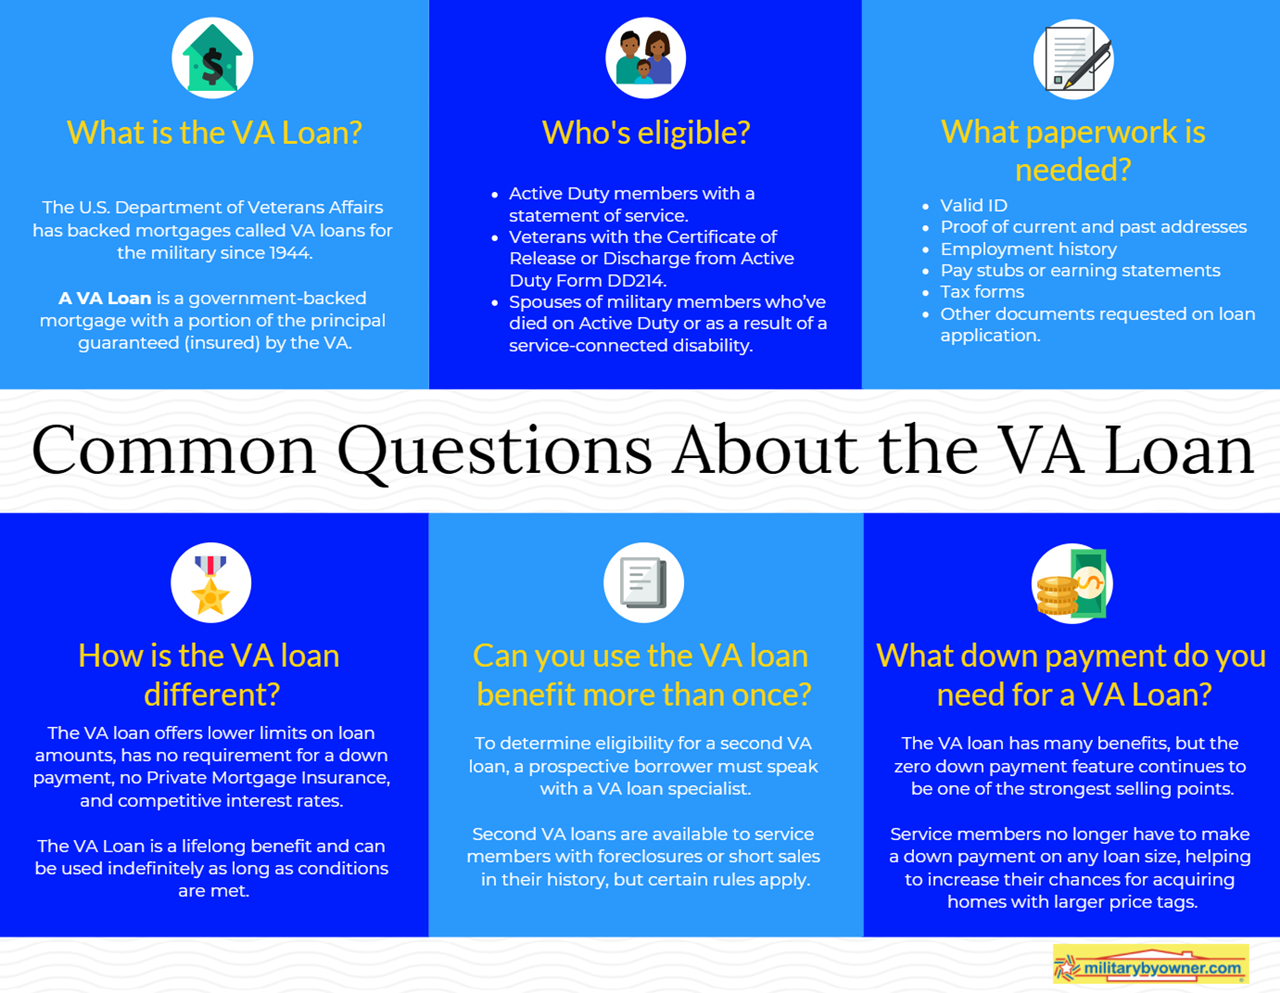 Common Questions about the VA loan infographic